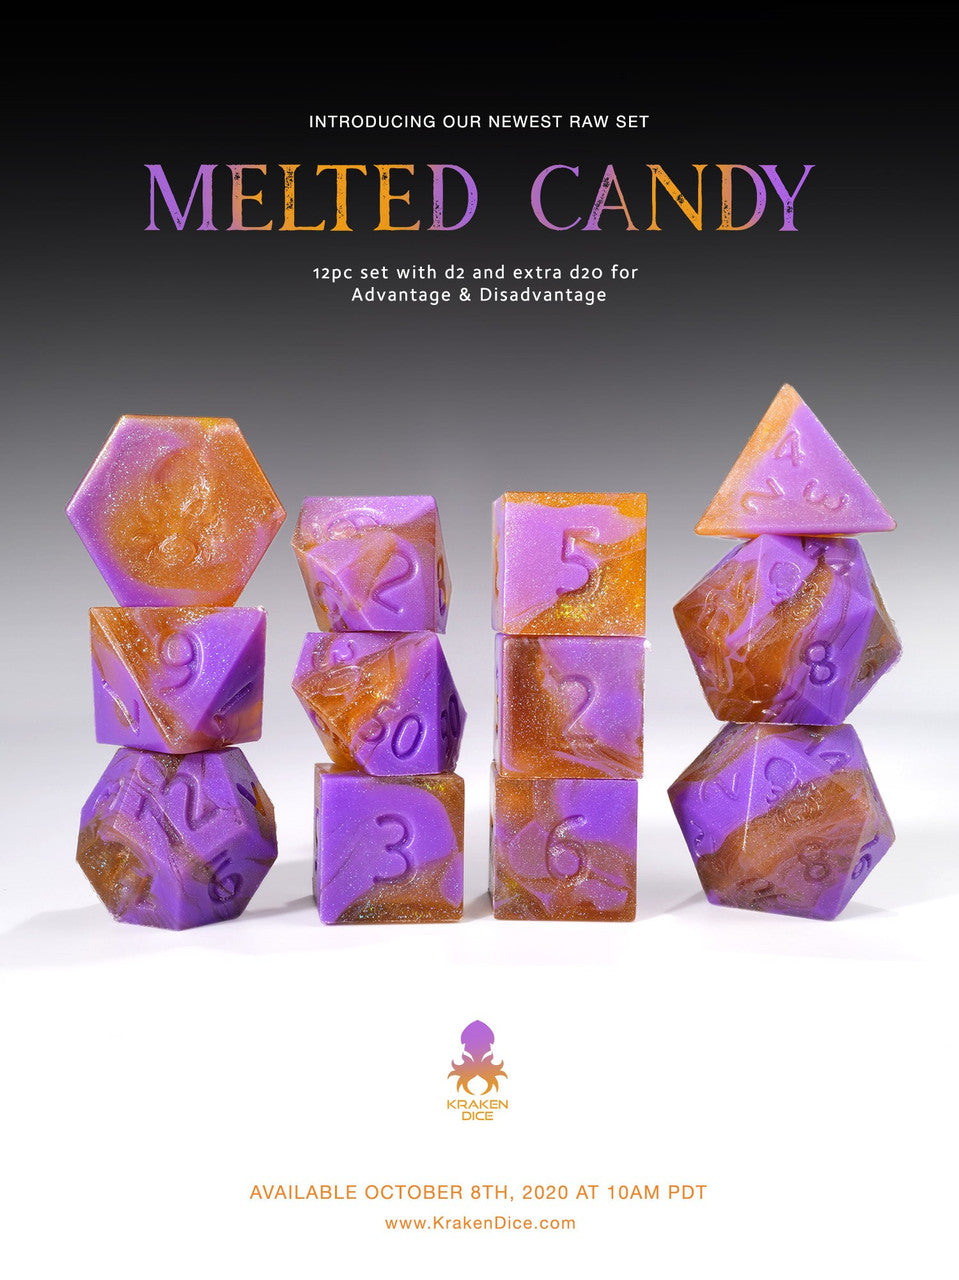 Melted Candy RAW 12pc  RPG Dice Set